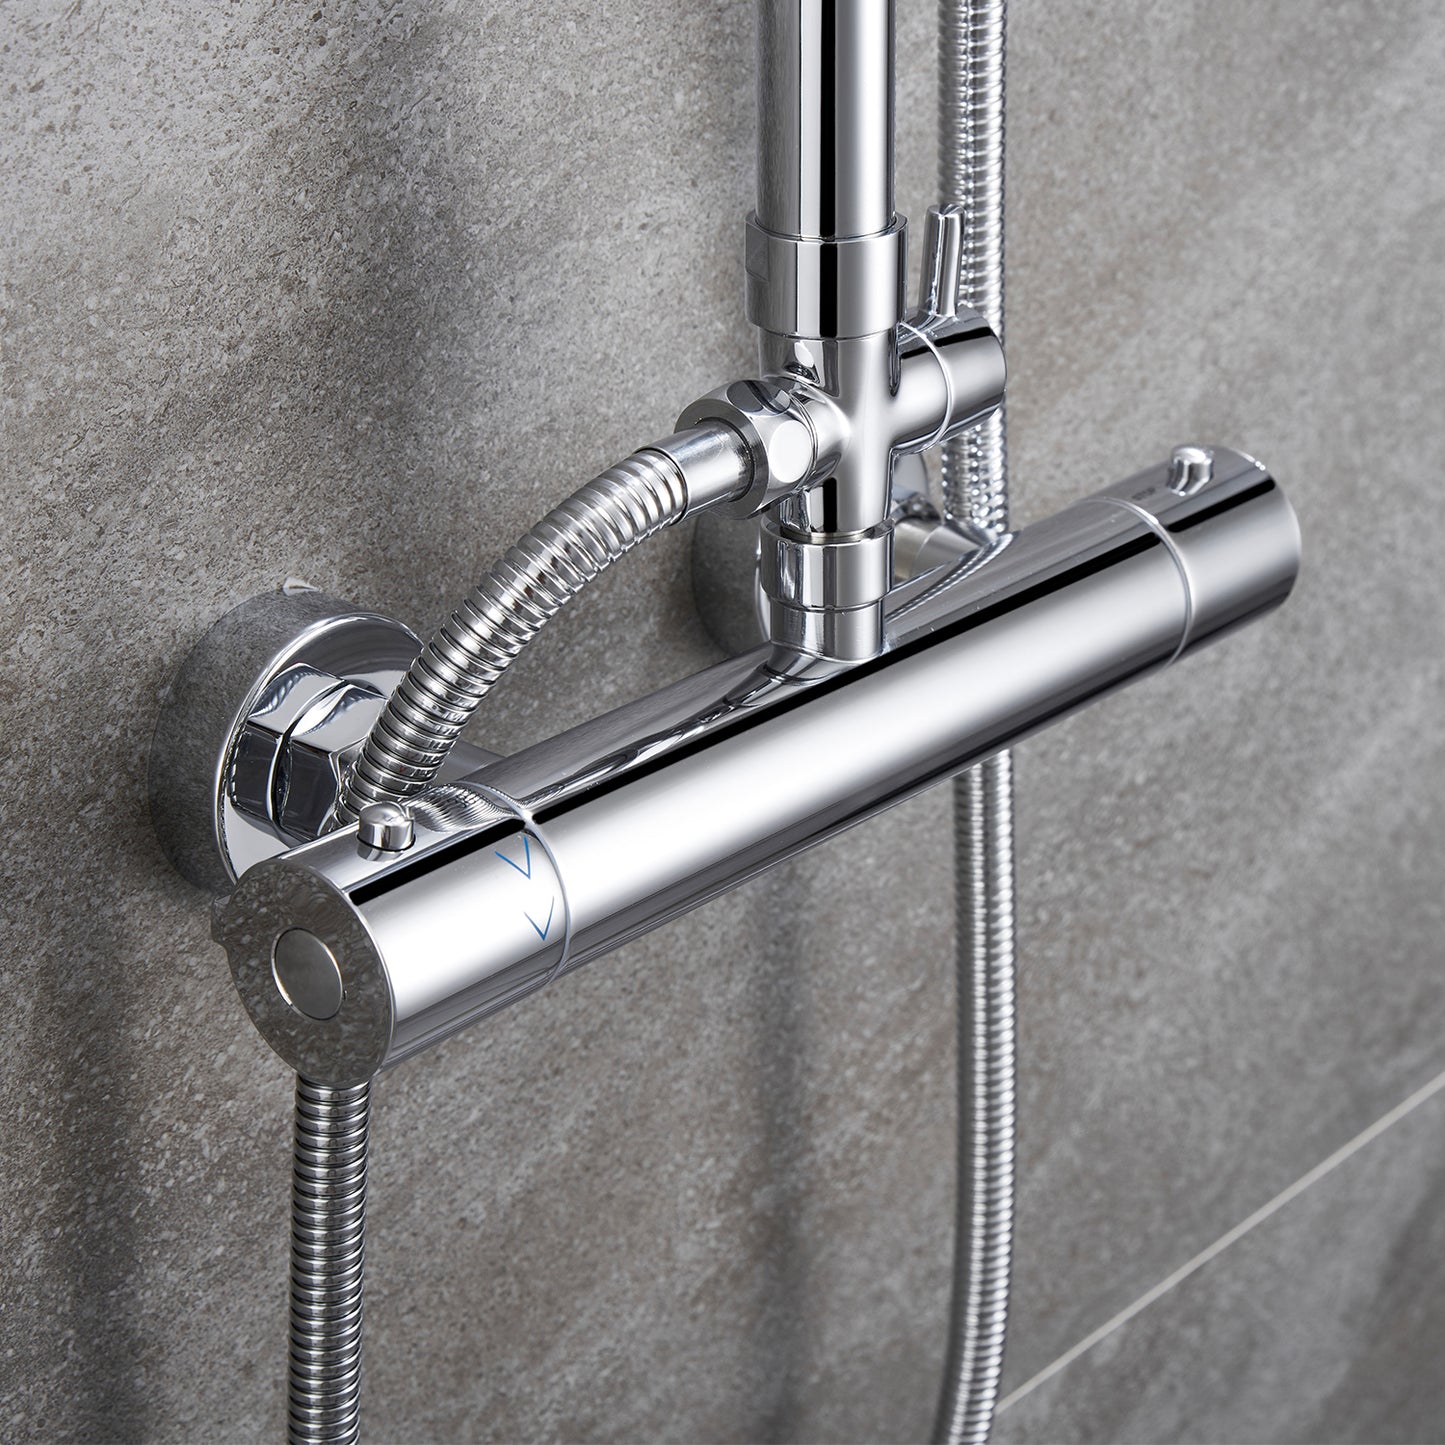 AICA thermostatic shower mixer details